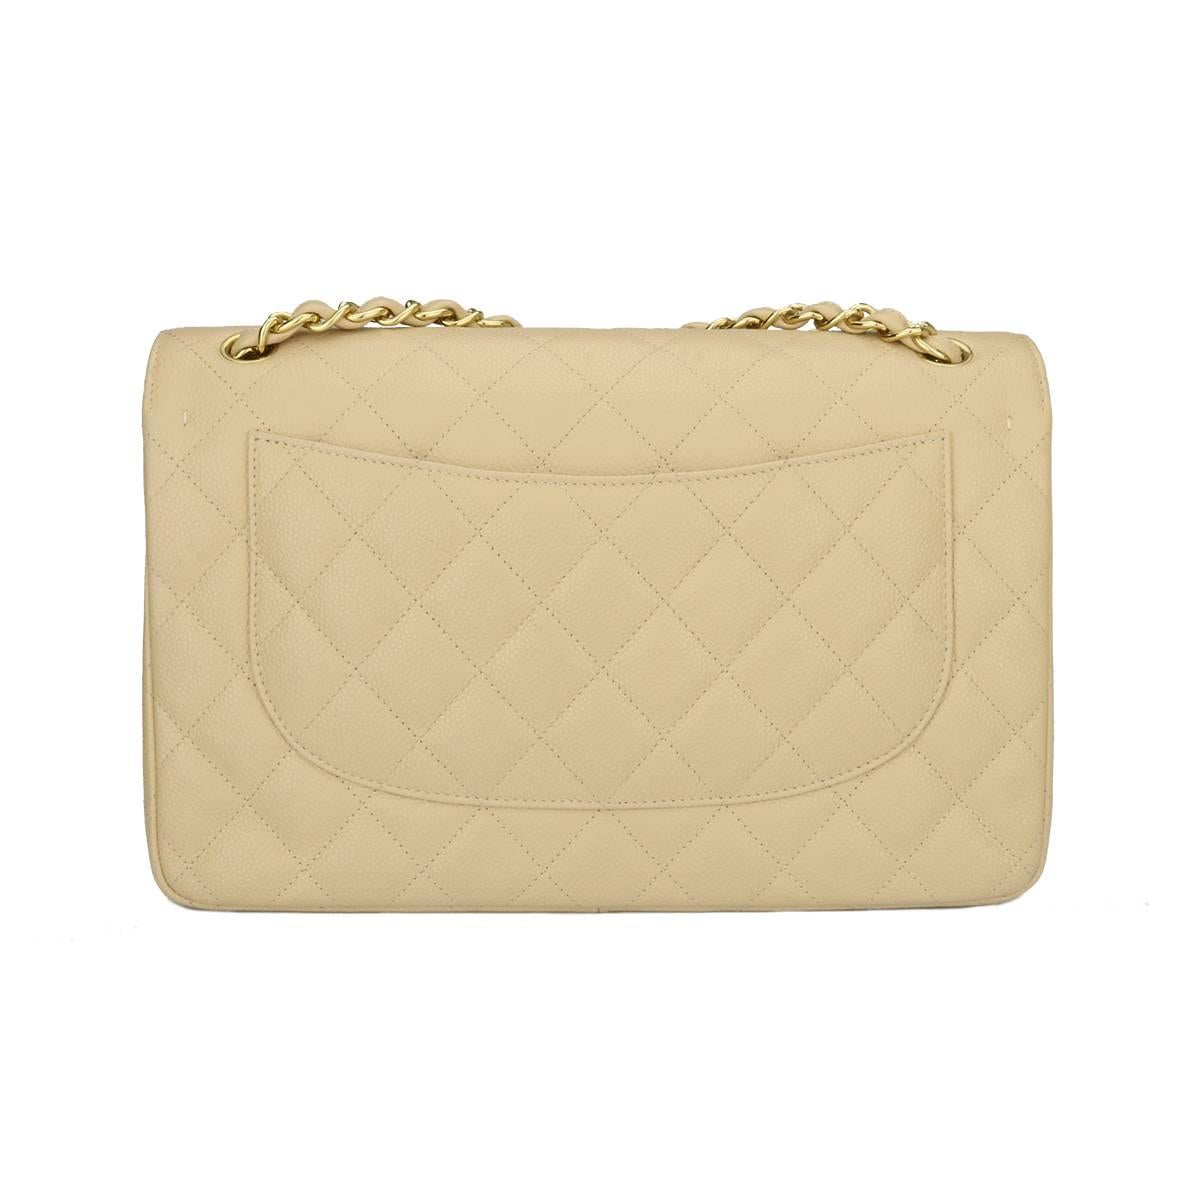 Authentic CHANEL Classic Jumbo Double Flap Beige Clair Caviar with Gold Hardware 2012.

This stunning bag is in mint-pristine condition, the bag still holds its original shape, and the hardware is still very shiny

Exterior Condition: Pristine